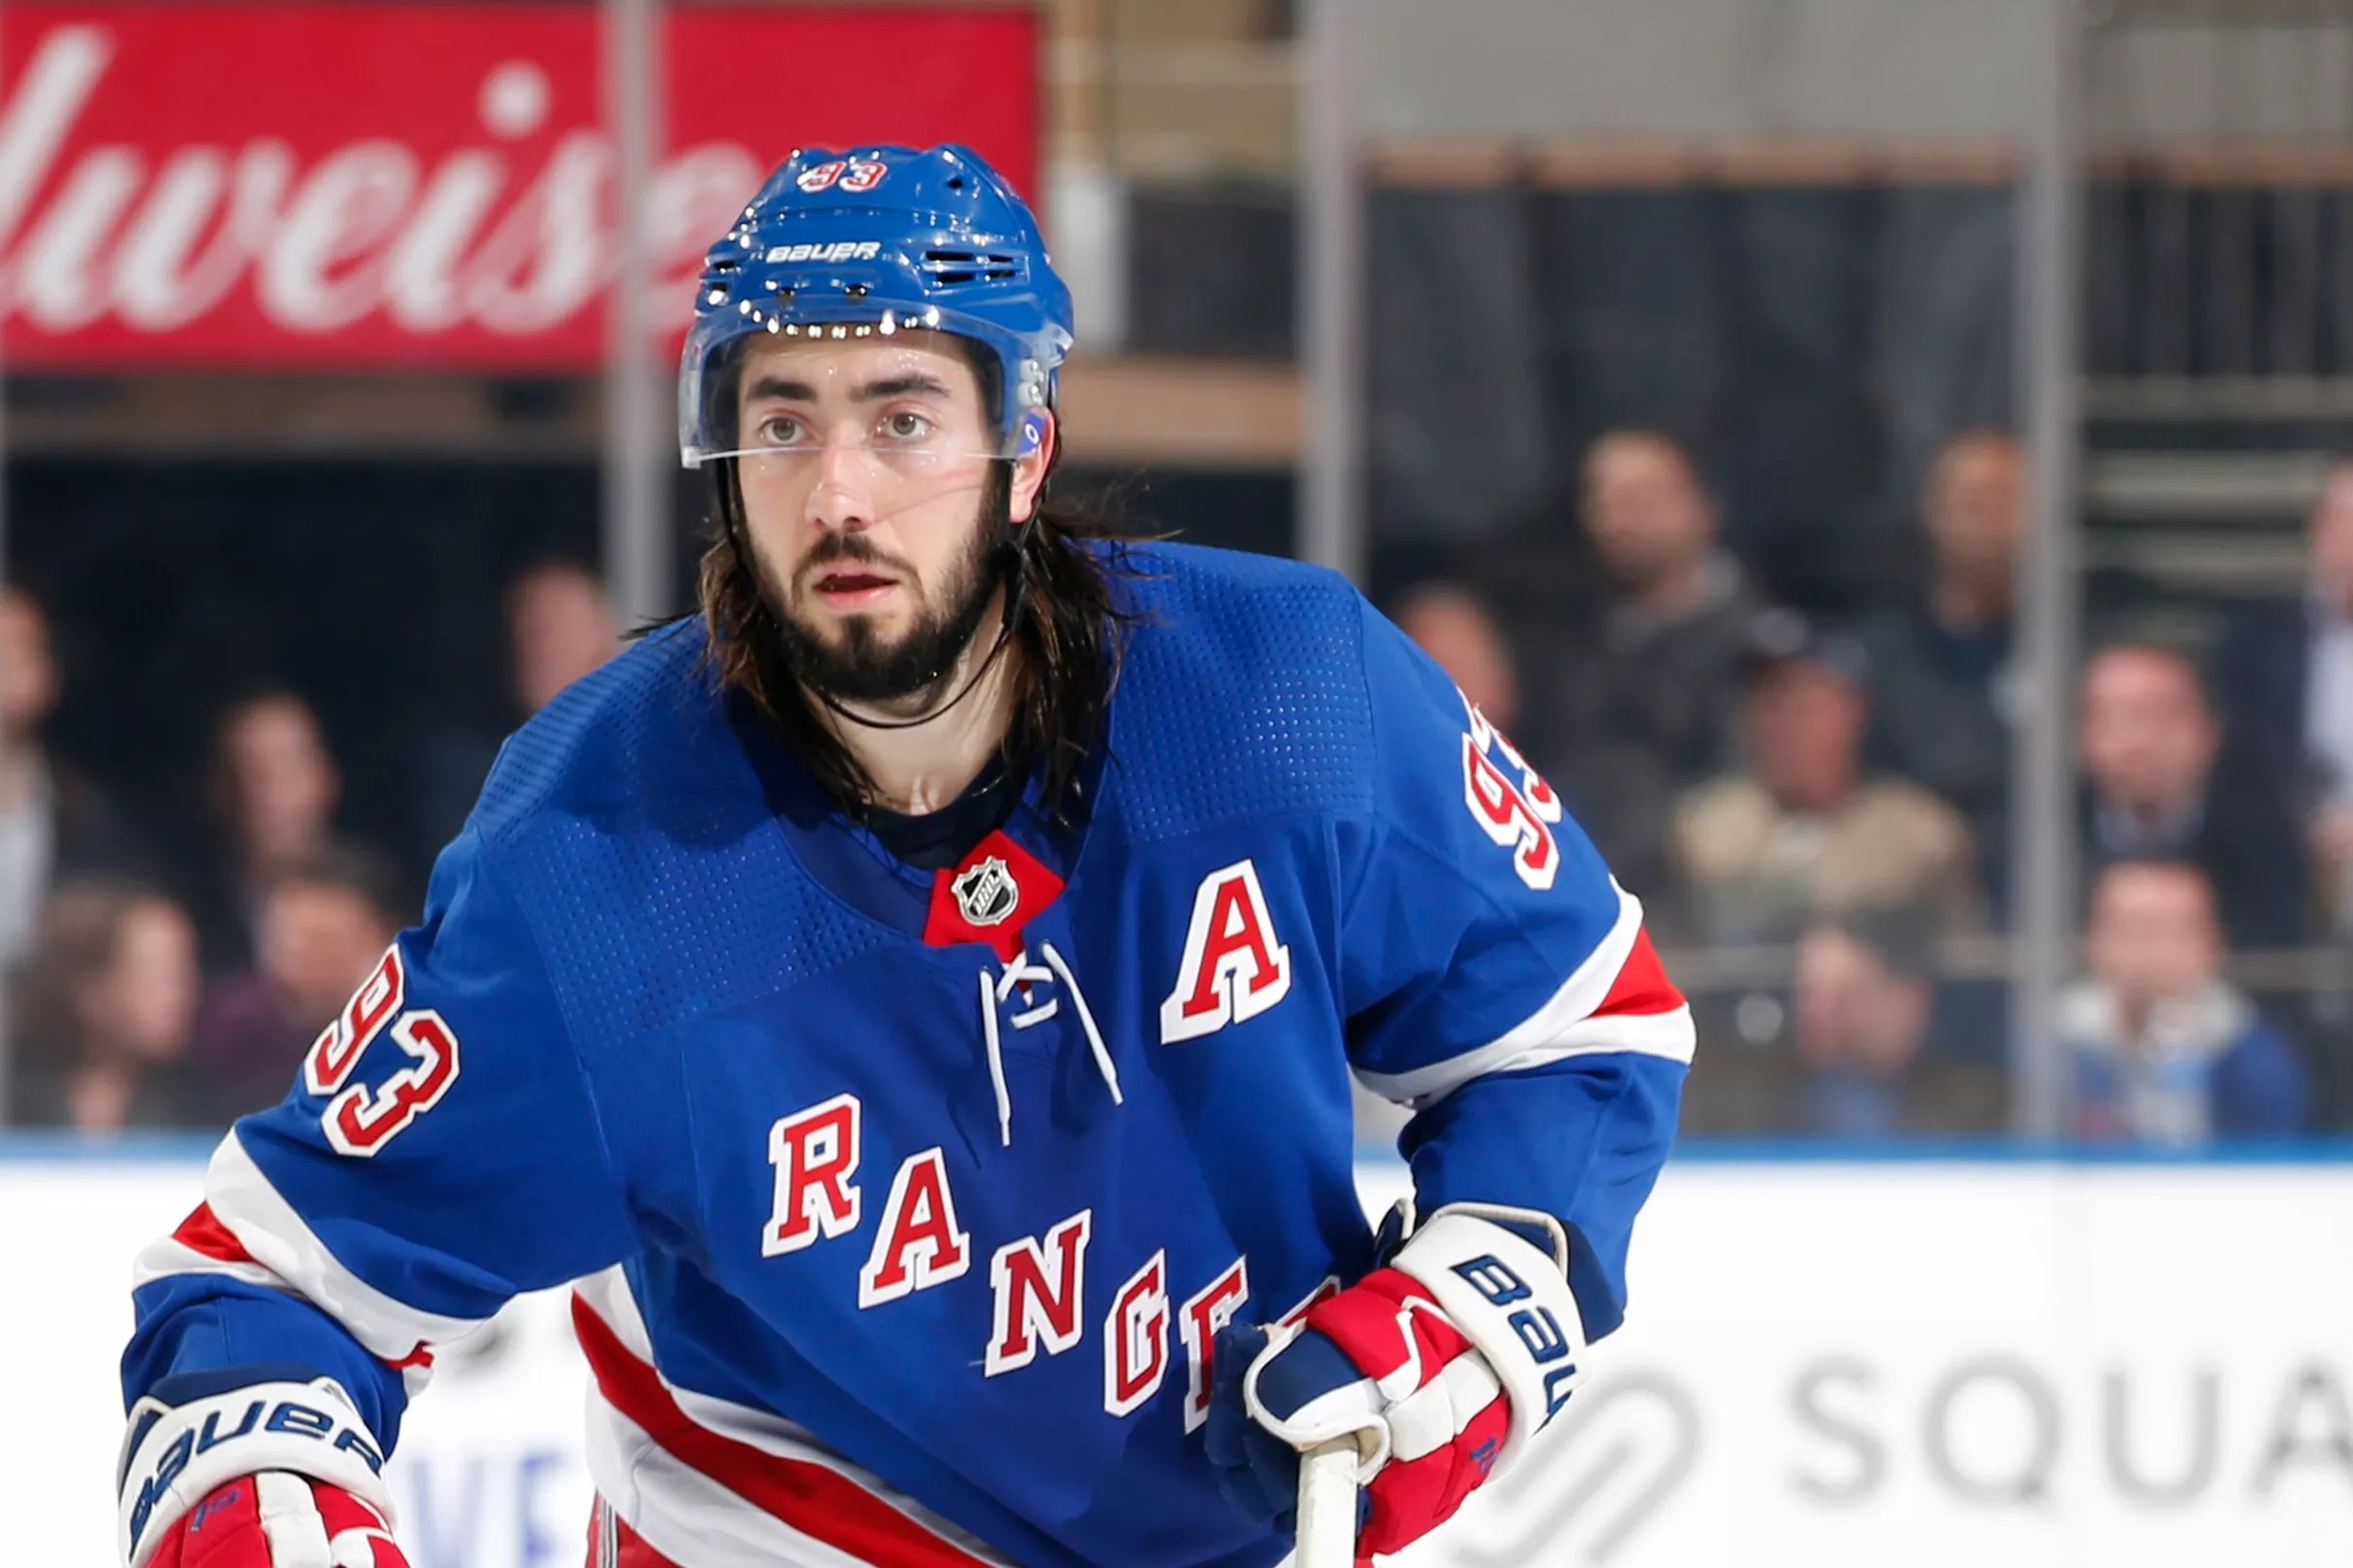 Mika Zibanejad has been the one star to show up on offense this series